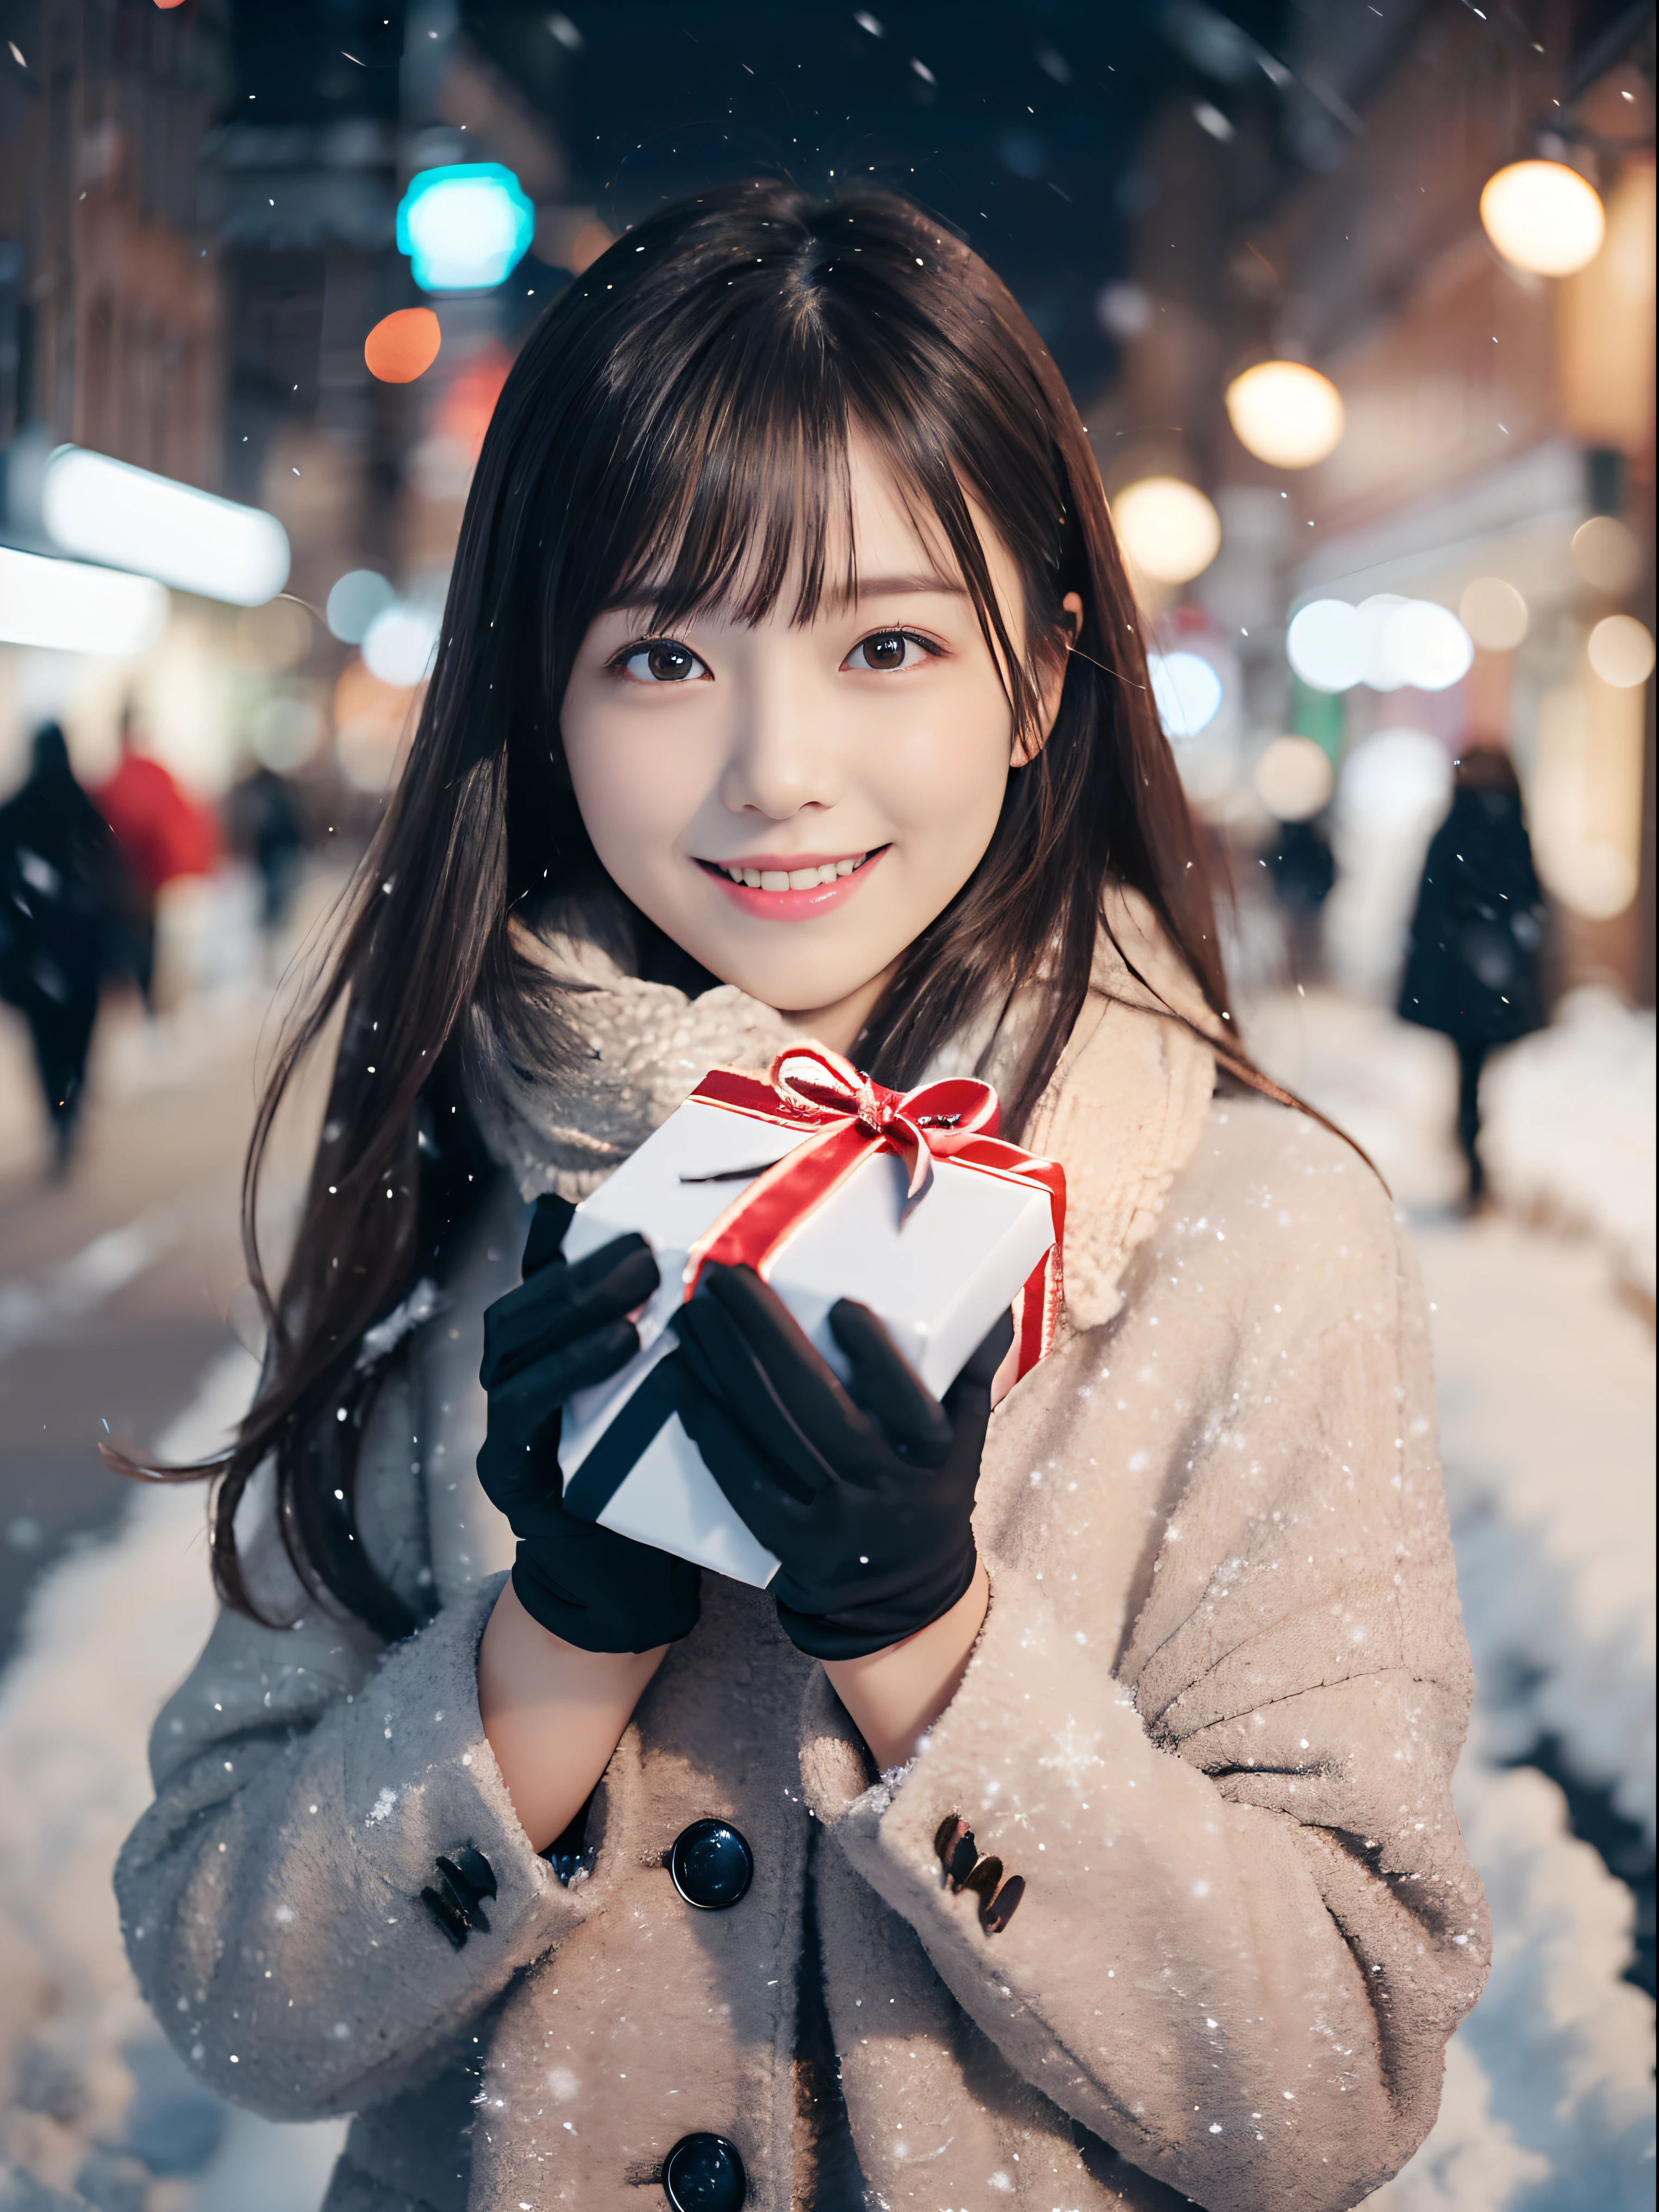 (A close-up of one girl is、Has long hair with dull bangs in a winter uniform and scarf coat:1.5)、(One girl with a shy smile、Holding a gift box with gloves in hand:1.5)、(Snowy winter night street corner and Christmas lights:1.5)、(Perfect Anatomy:1.3)、(No mask:1.3)、(complete fingers:1.3)、Photorealistic、Photography、masutepiece、top-quality、High resolution, delicate and pretty、face perfect、Beautiful detailed eyes、Fair skin、Real Human Skin、pores、((thin legs))、(Dark hair)